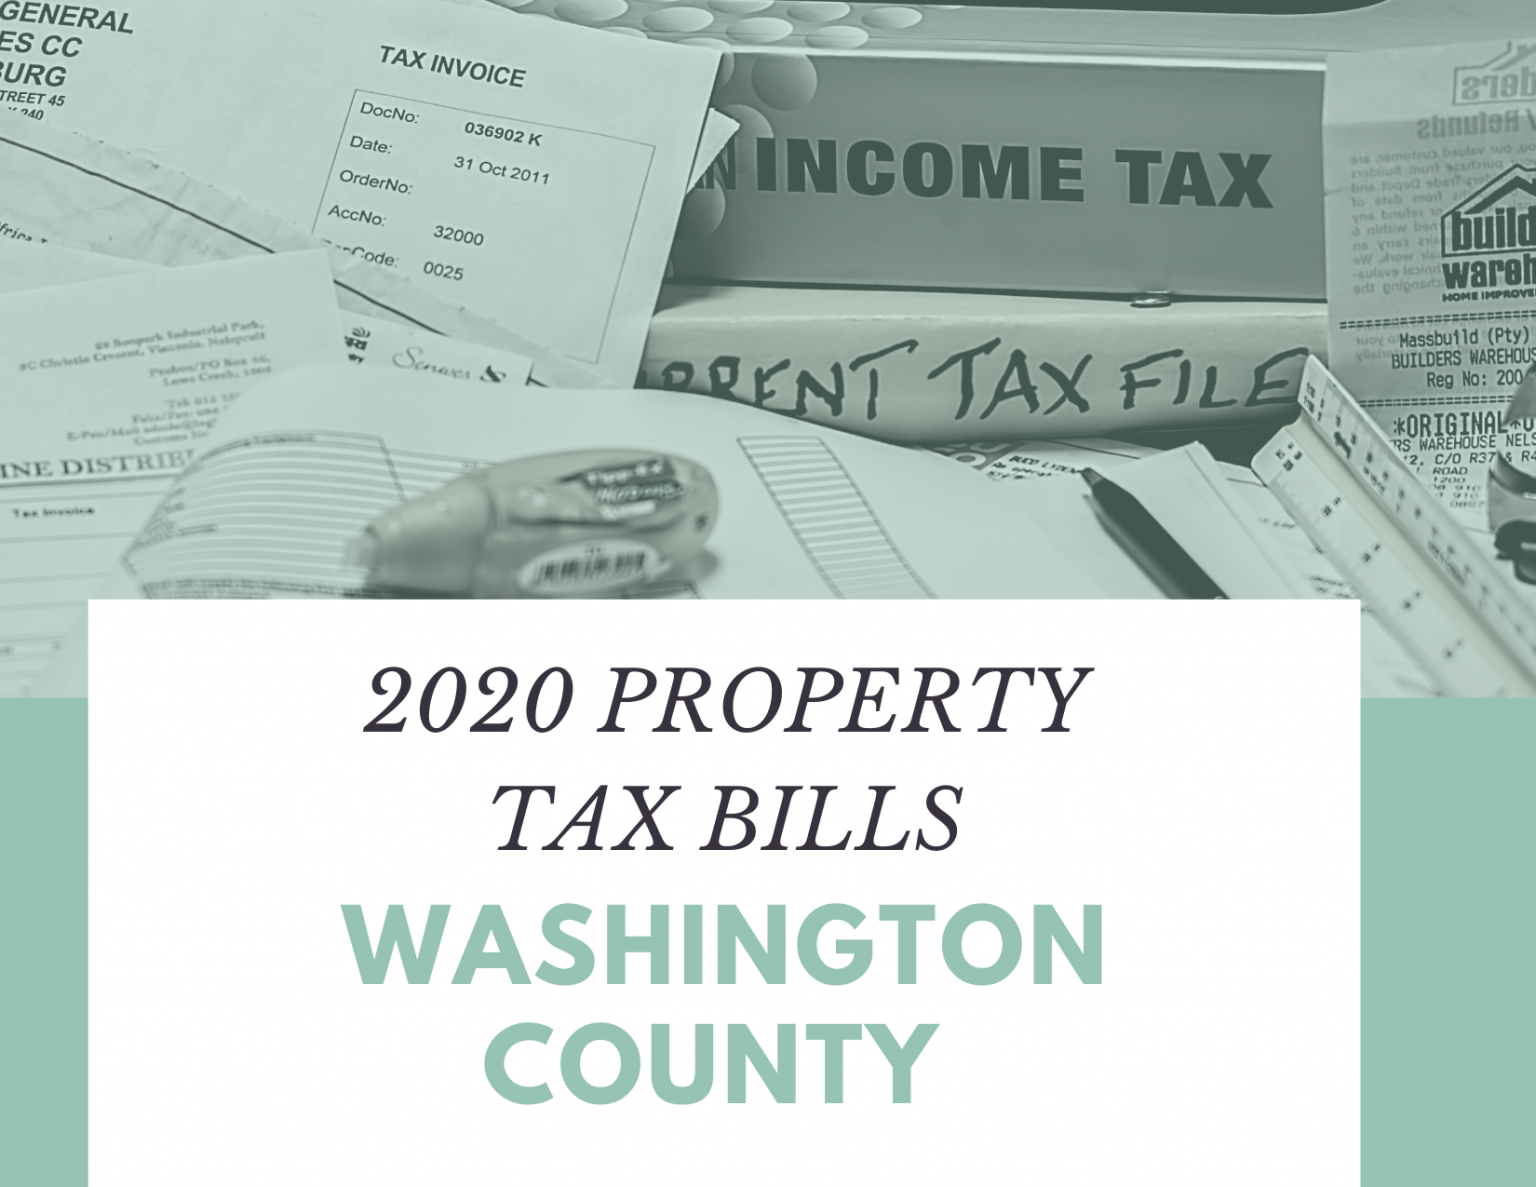 2020 property tax statements online for much of Washington County